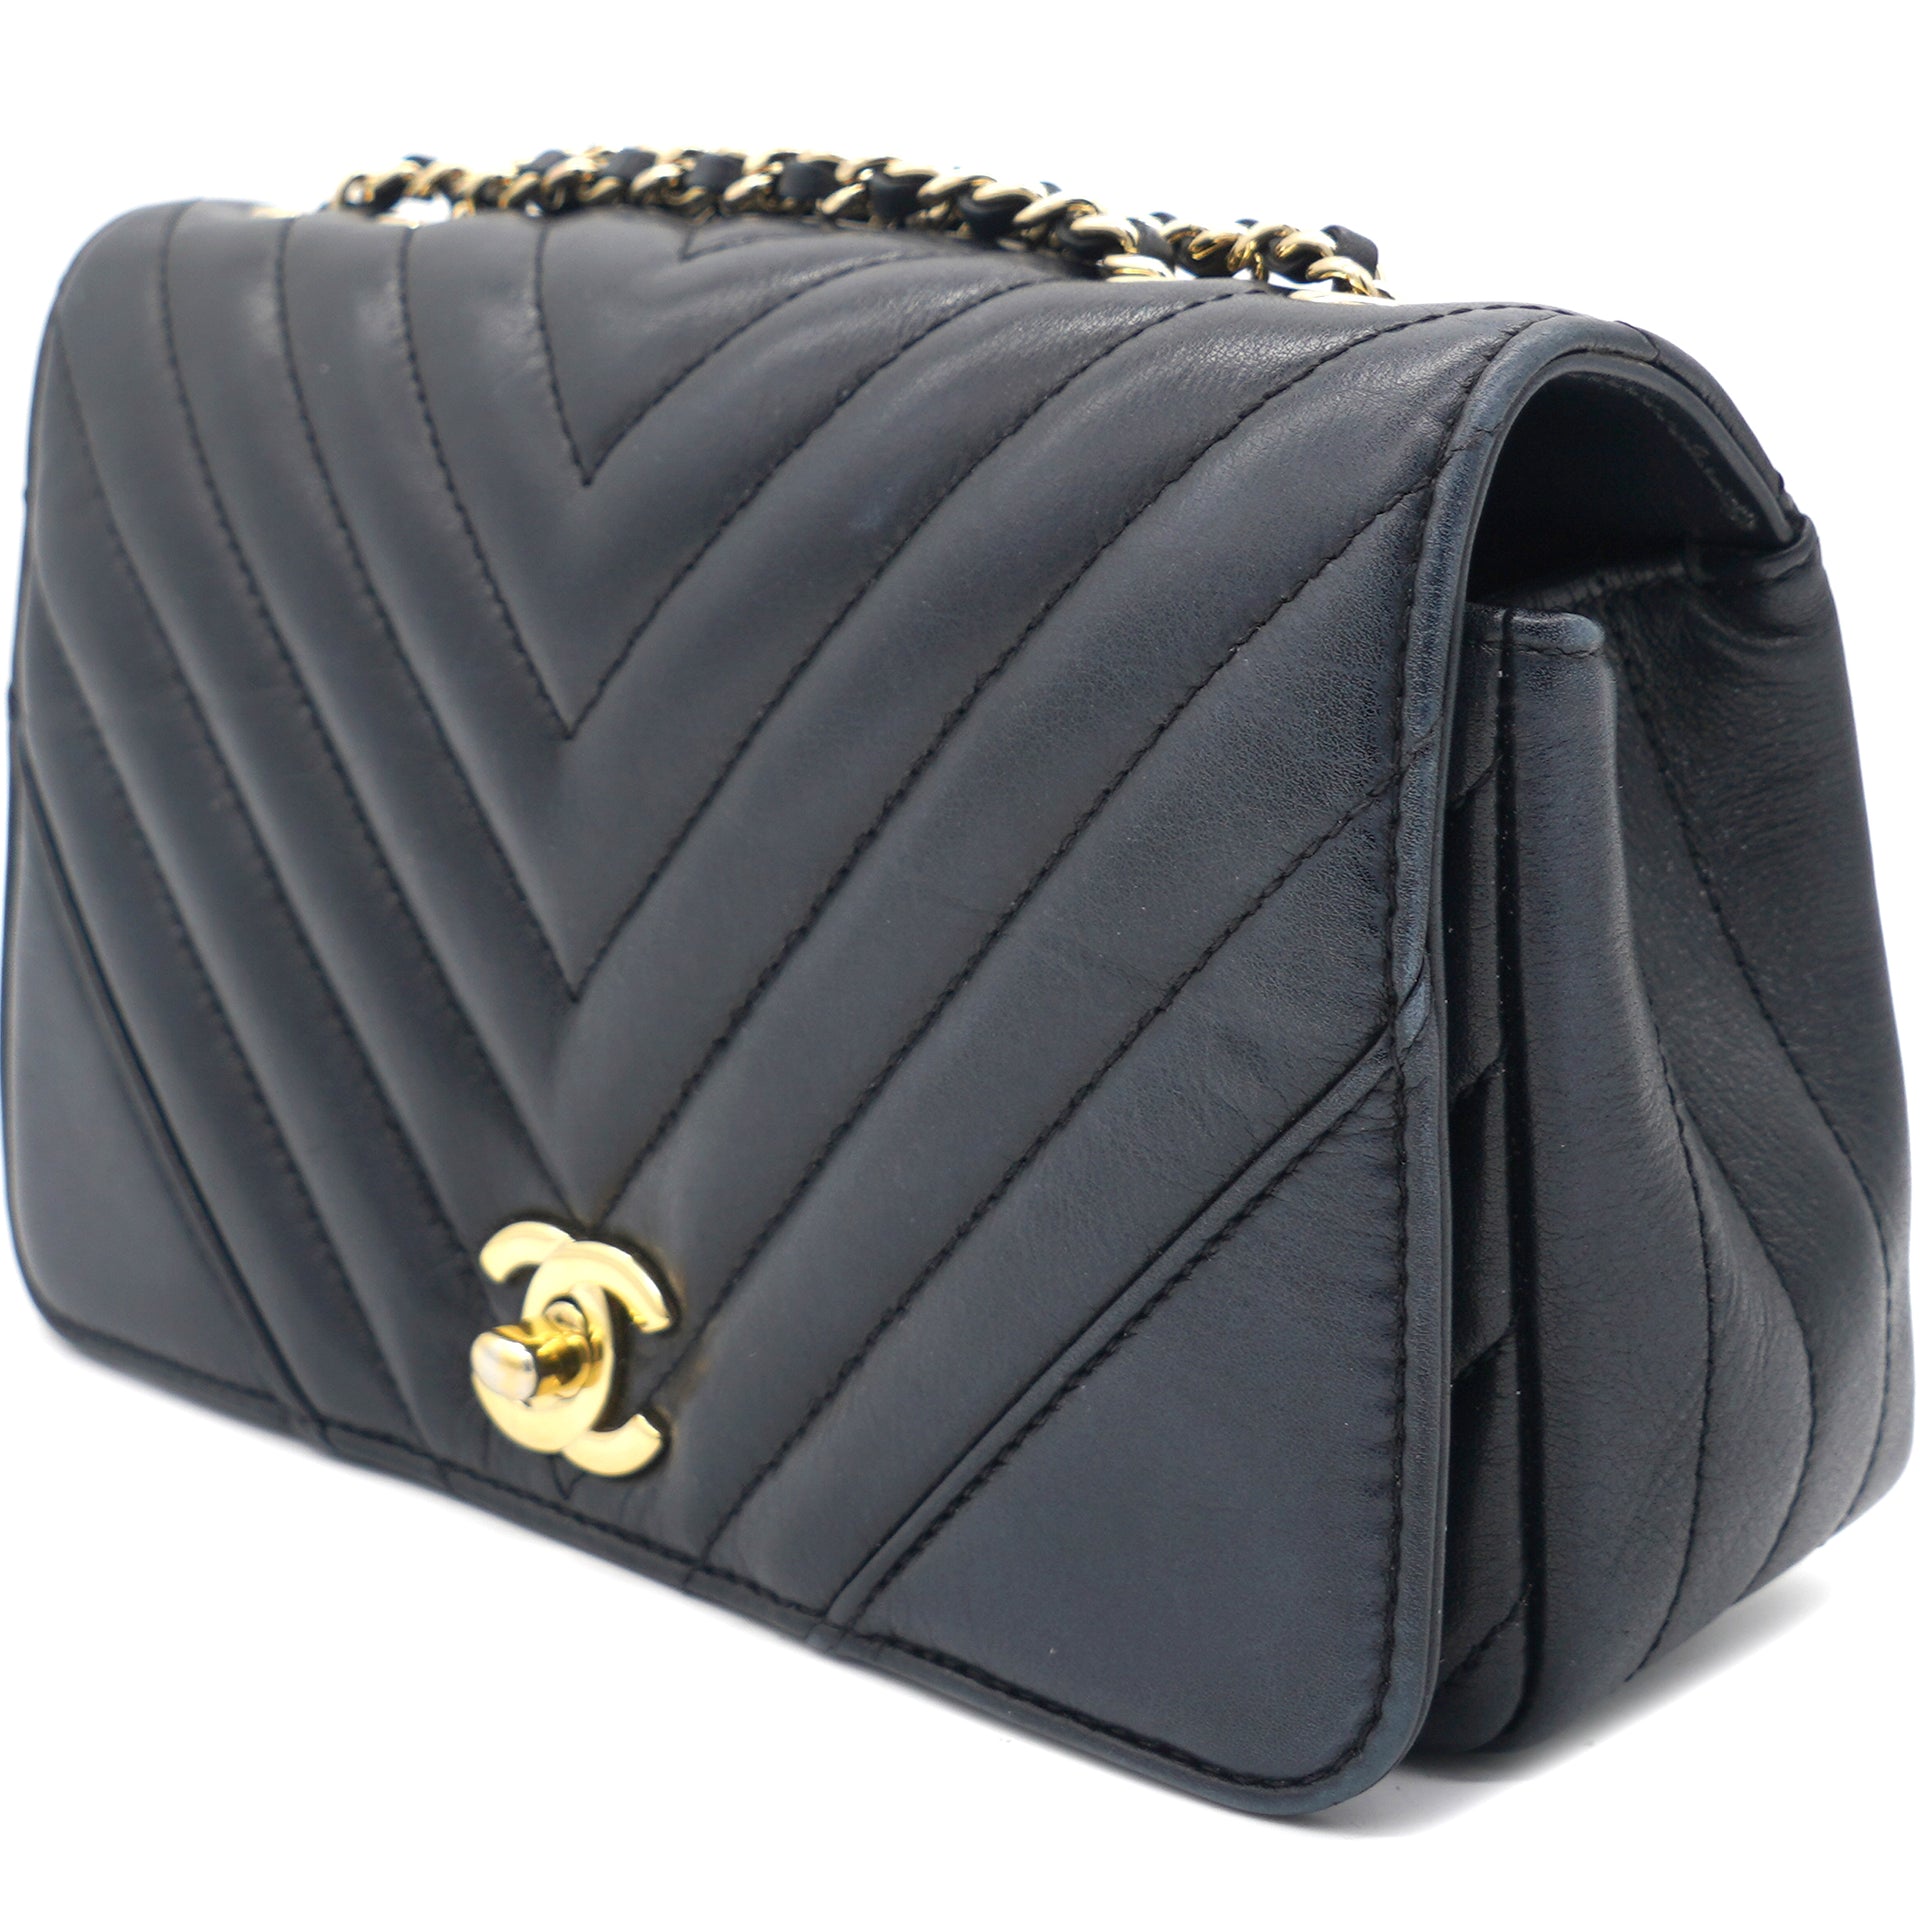 Chanel Statement Flap Quilted Chevron Crossbody Bag